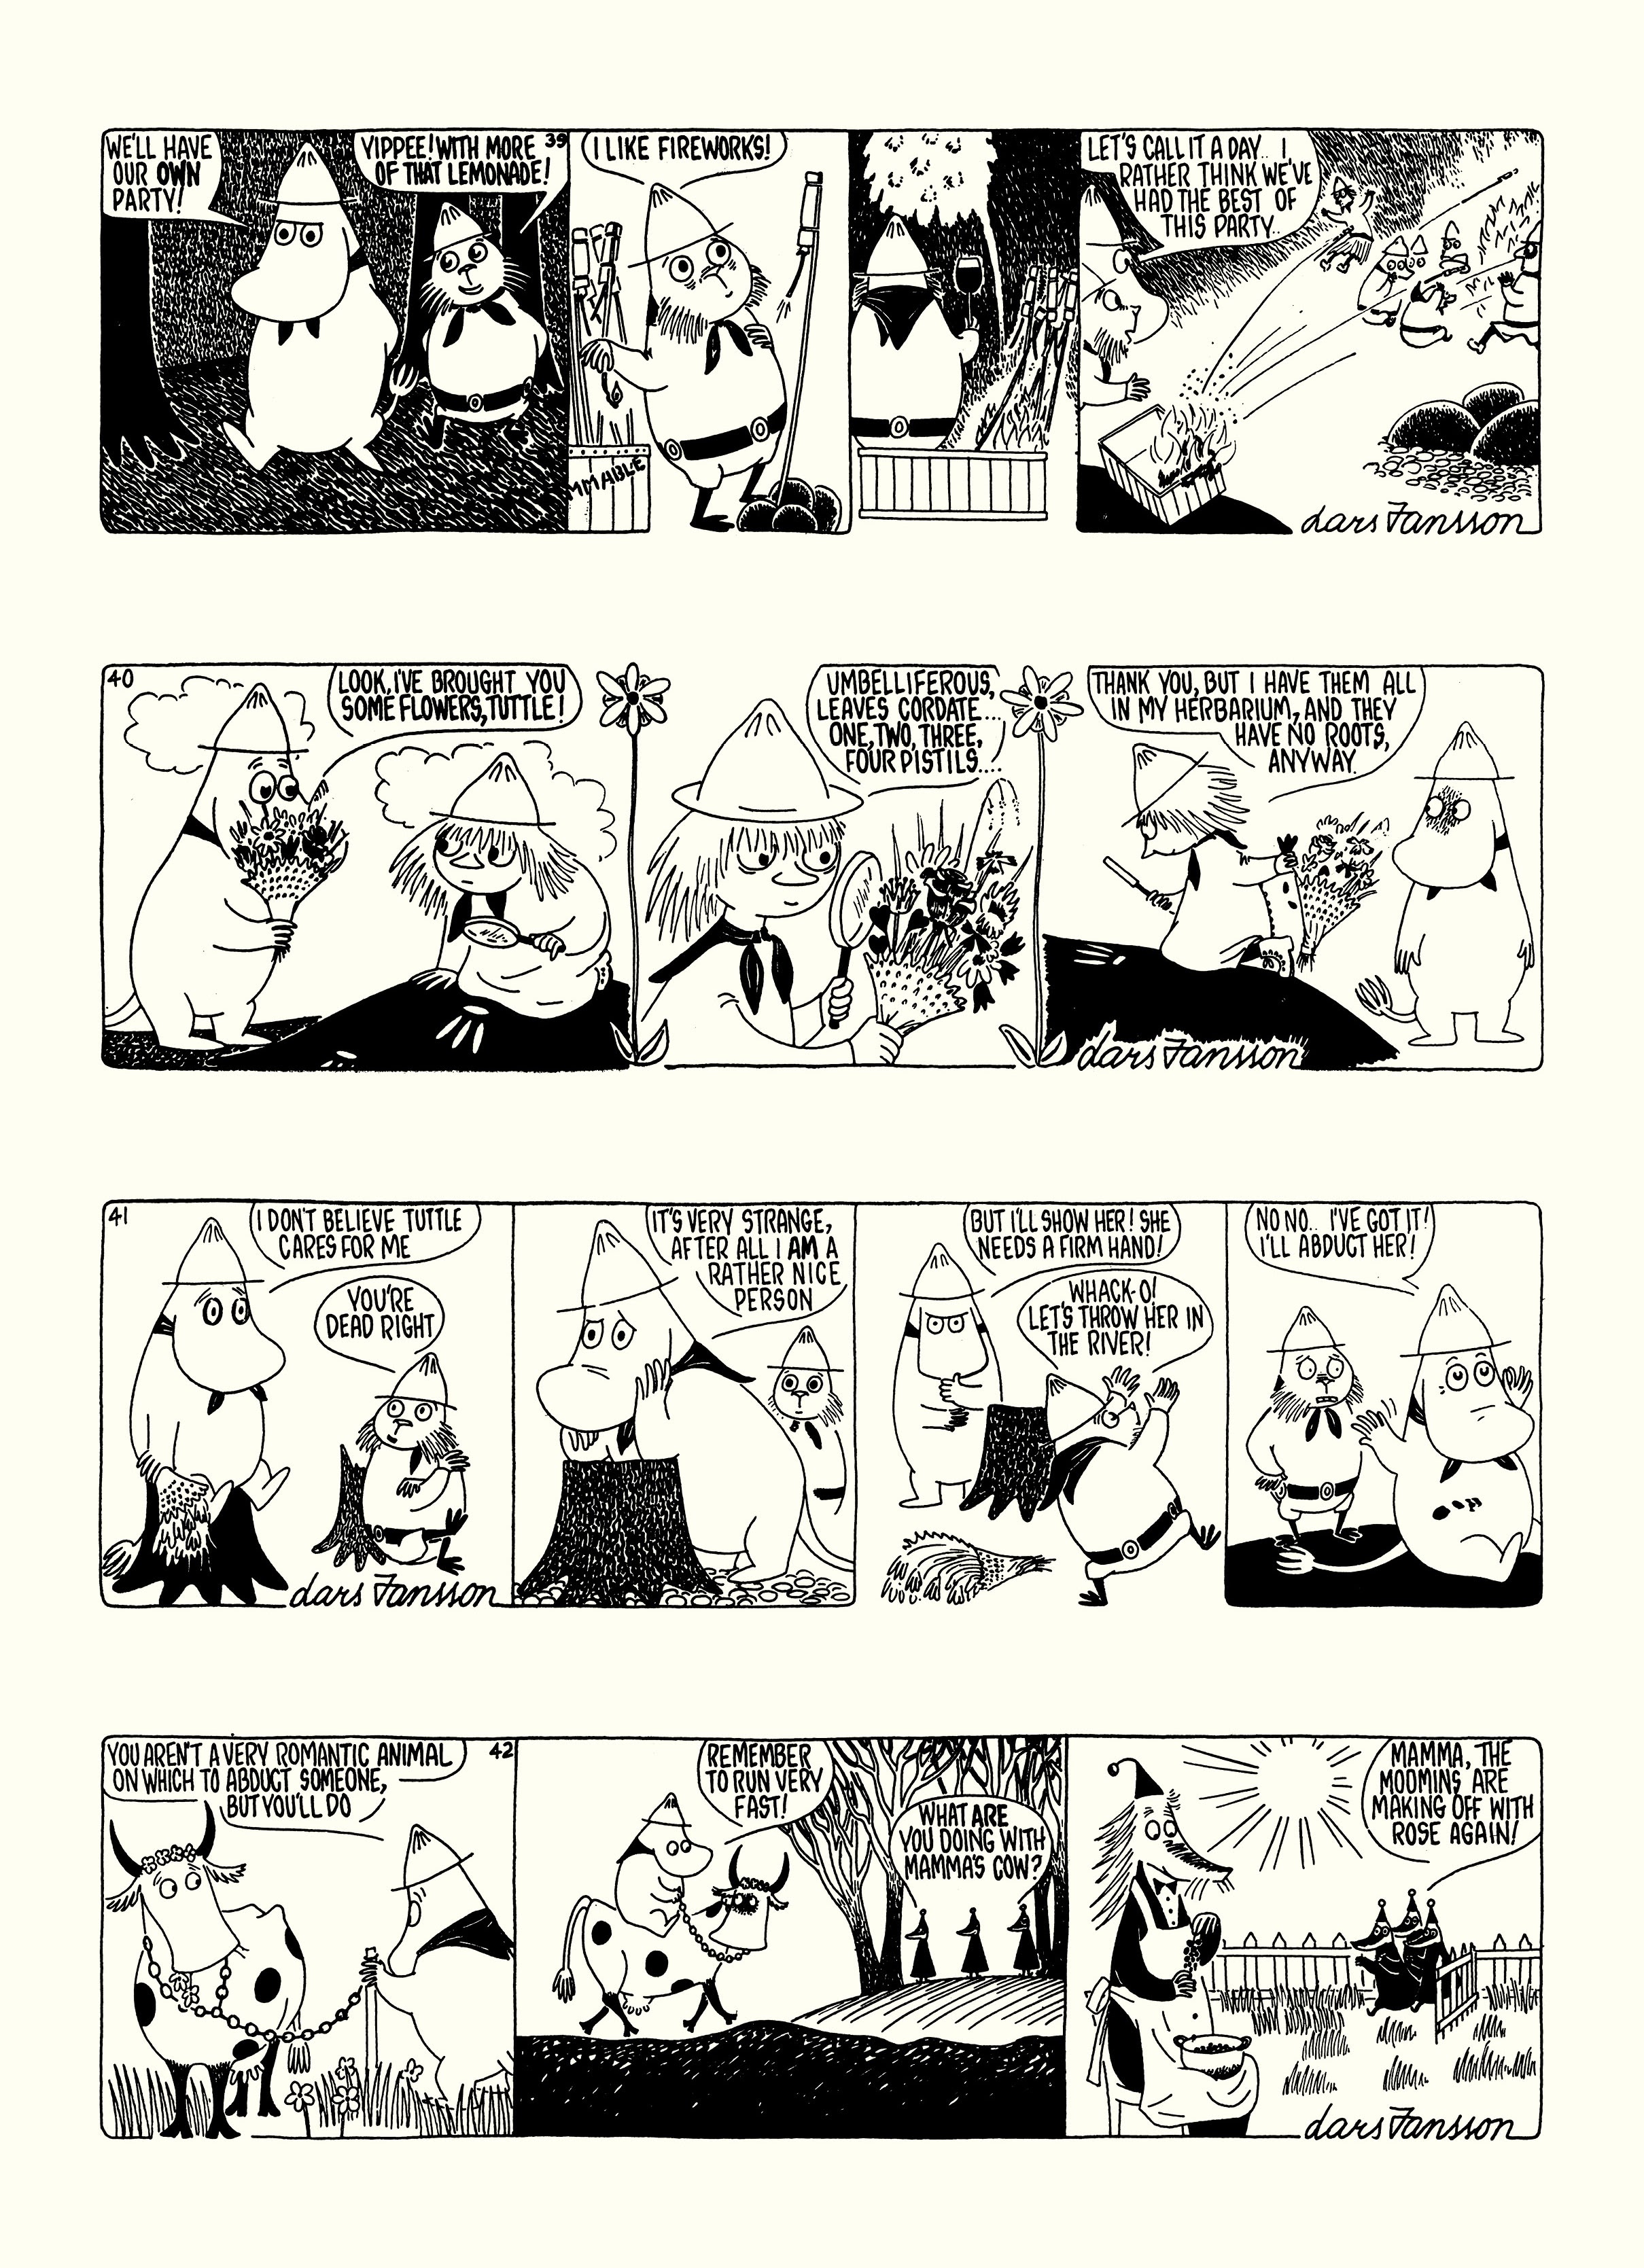 Read online Moomin: The Complete Lars Jansson Comic Strip comic -  Issue # TPB 7 - 37